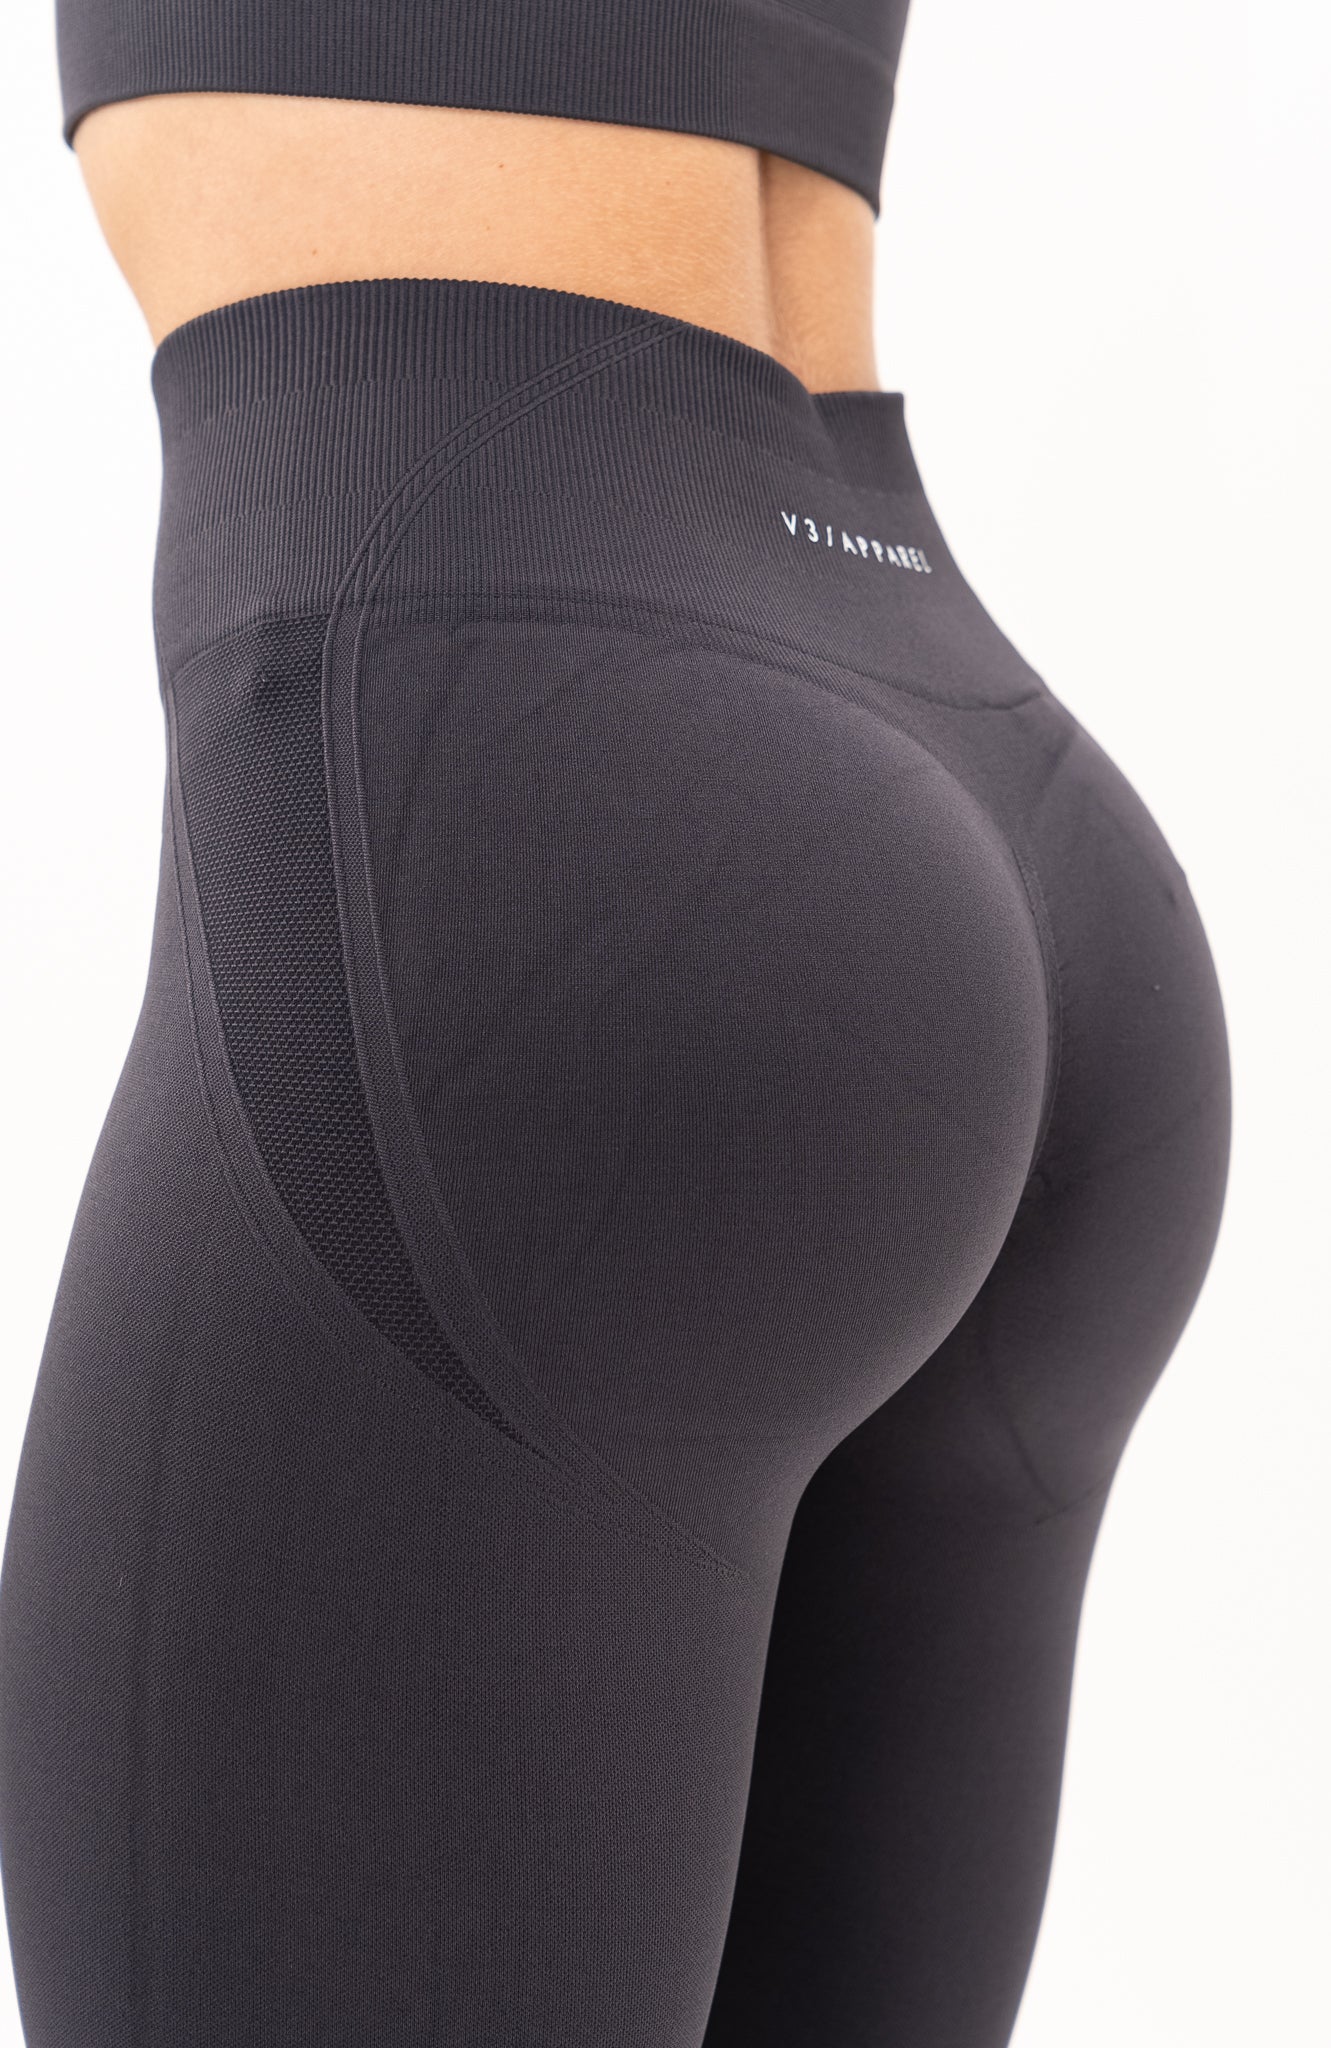 redbaysand Women's Tempo seamless scrunch bum shaping high waisted leggings in charcoal grey – Squat proof sports tights for Gym workouts training, Running, yoga, bodybuilding and bikini fitness.